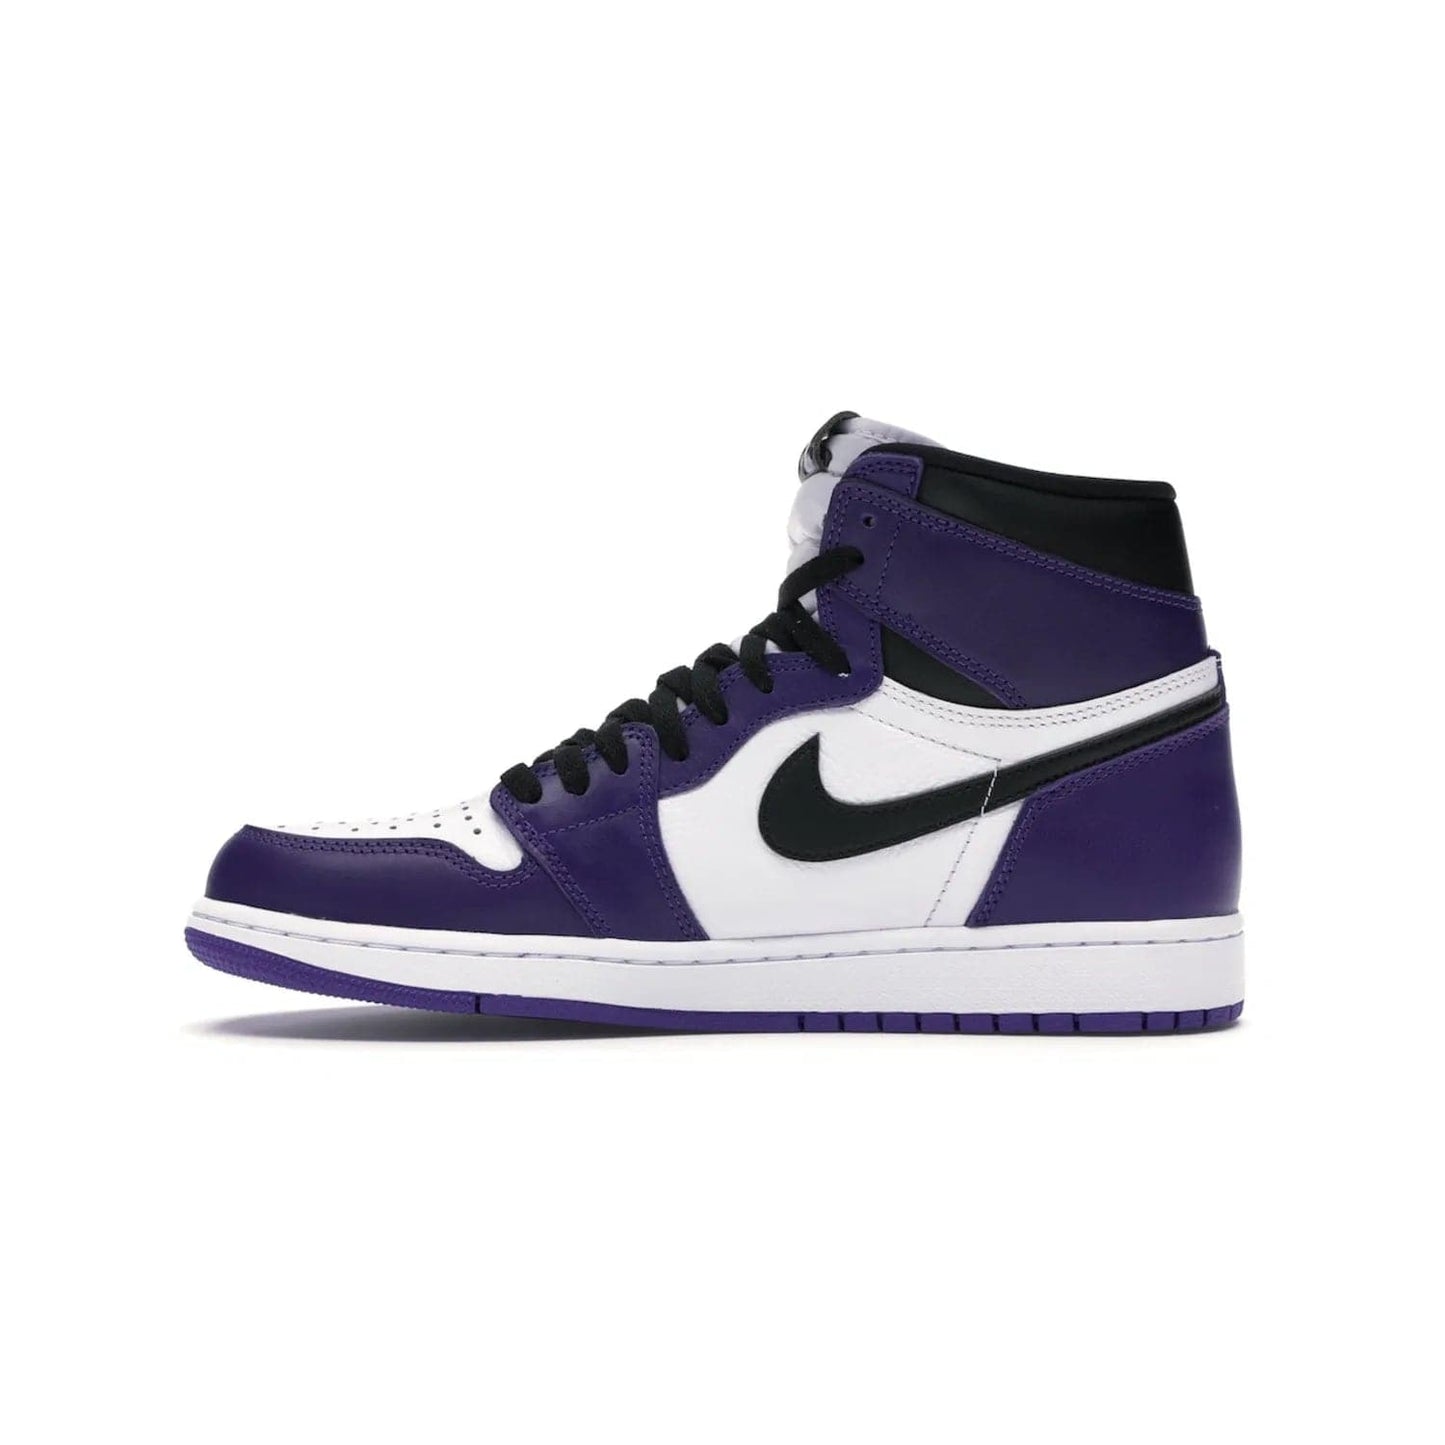 Jordan 1 Retro High Court Purple White - Image 19 - Only at www.BallersClubKickz.com - Grab the classic Jordan 1 Retro High Court Purple White and add major flavor to your collection. White leather upper with Court Purple overlays and Swoosh logo. White midsole and purple outsole. Get yours and rep your Jordan Brand.